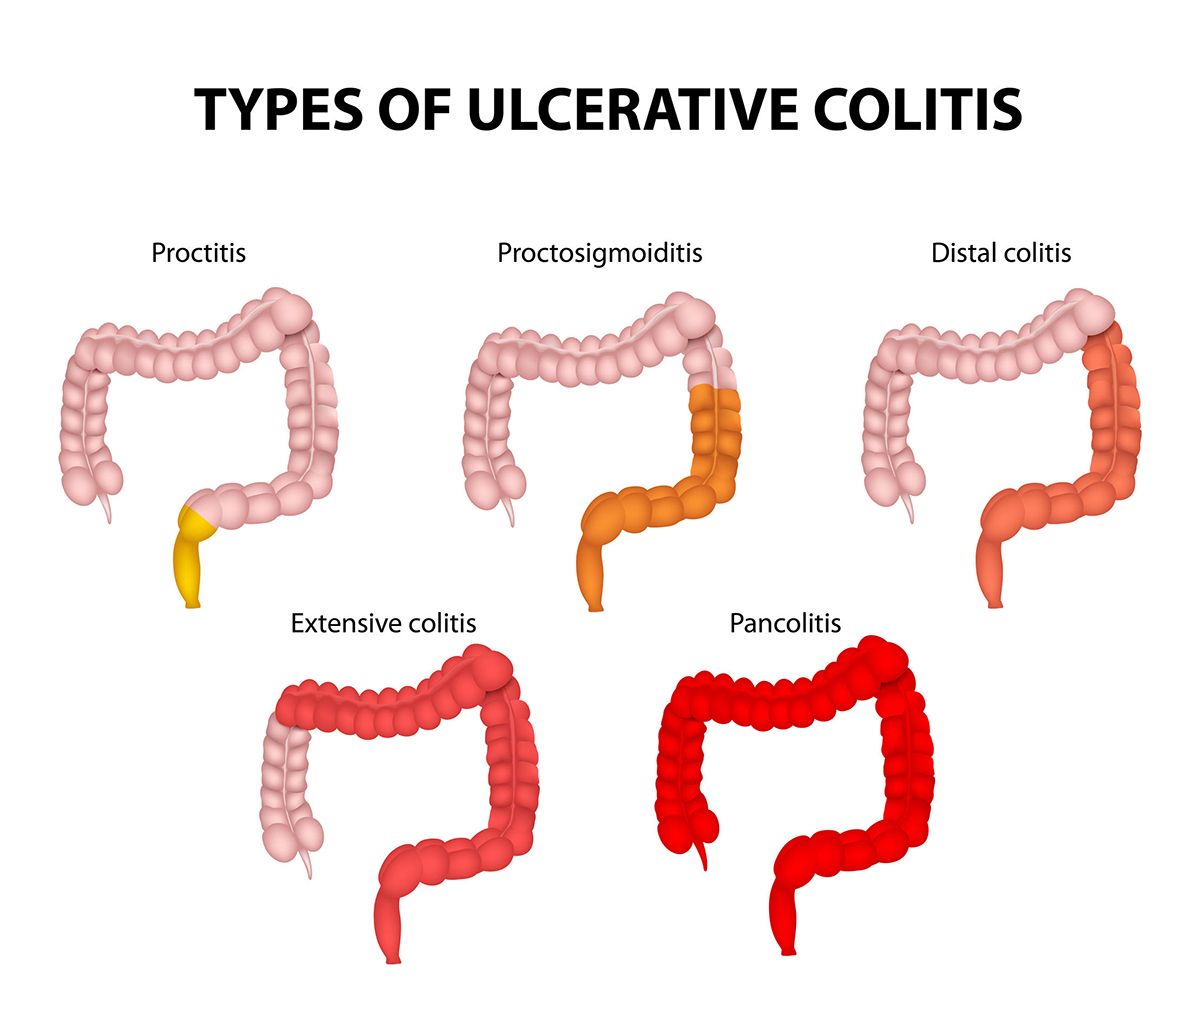 Types of Ulcerative Colitis. The diagram shows the types of UC, from the proctitis, (involving just the rectum), to the pancolitis, (involving the entire colon).